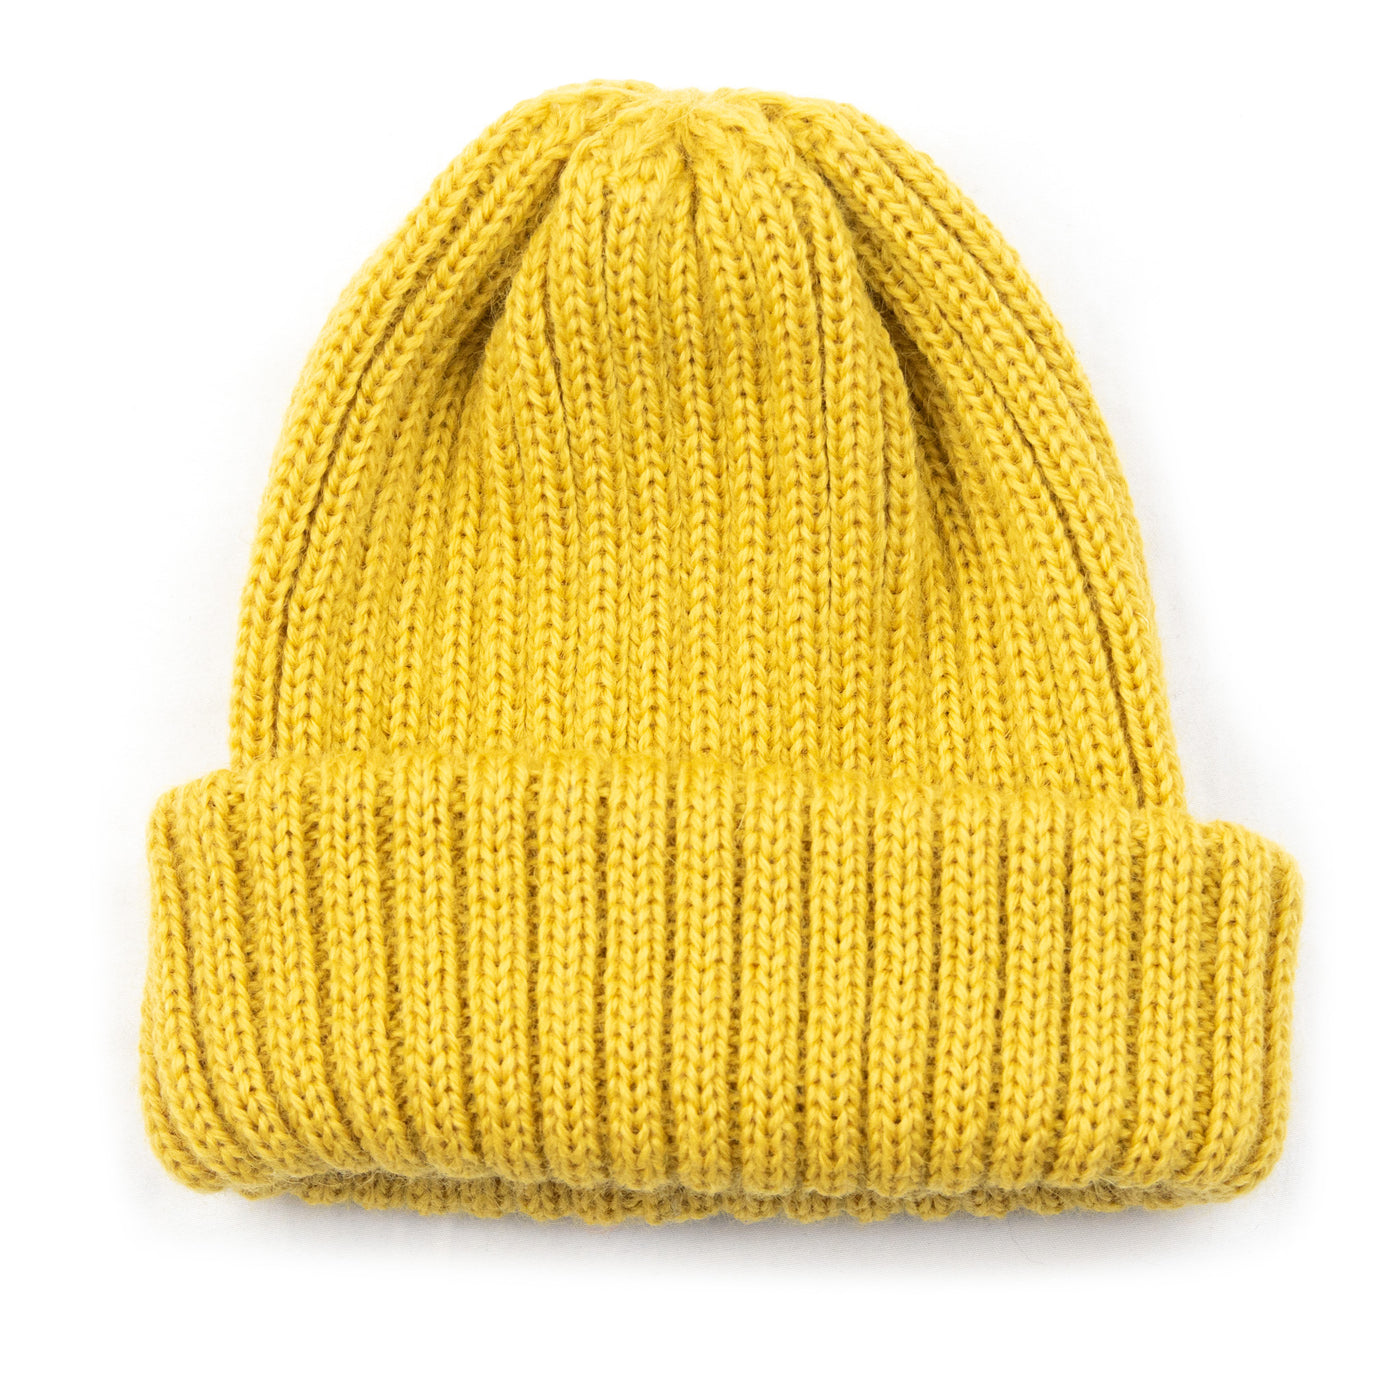 Connor Reilly Wool Watch Cap Mustard Made In England FRONT 